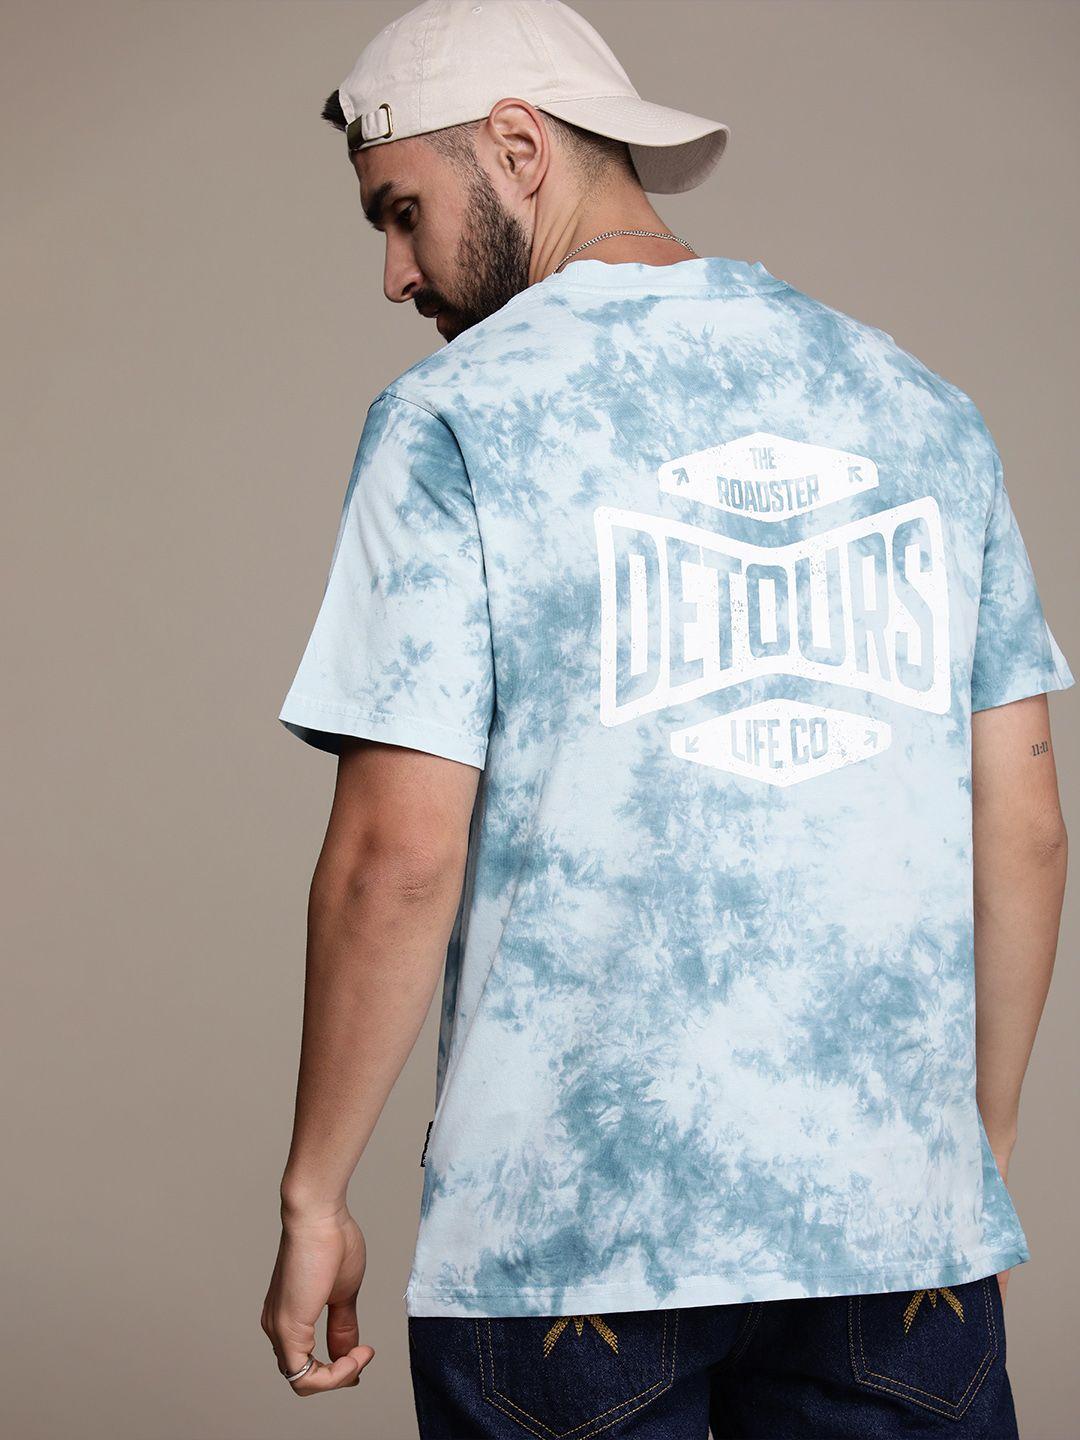 The Roadster Life Co. Tie & Dyed Printed Pure Cotton T-shirt